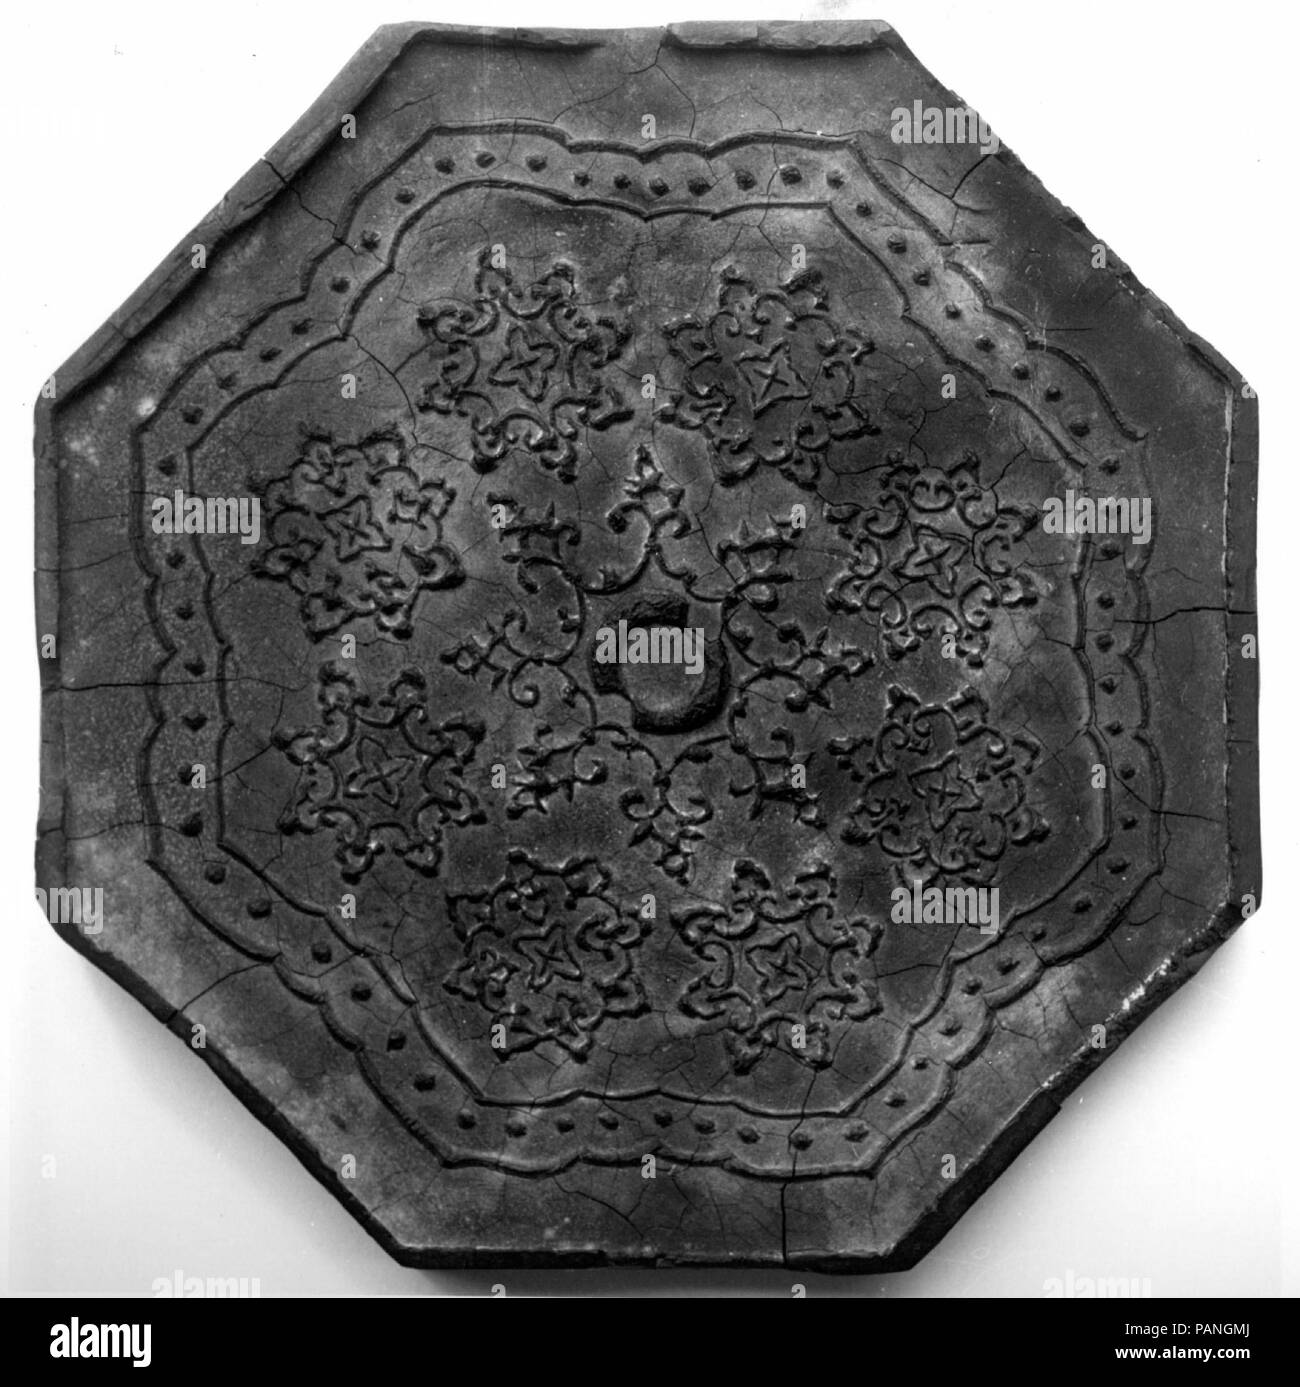 Ink Tablet with Tang Mirror Design. Culture: China. Dimensions: Diam. 4 3/8 in. (11.1 cm). Date: late 19th-early 20th century.  Woodblock illustrations were an important source of decorative designs during the late Ming and Qing dynasties. The eight-lobed, foliated Tang mirror decorating this octagonal ink cake was borrowed from an illustration in the Xinqing gujian (Catalogue of Xiqing Antiques), a compilation of the antiques collected in the Qing palace. A fictitious mark of Fang Yulu was added to this ink cake to increase its value. Museum: Metropolitan Museum of Art, New York, USA. Stock Photo